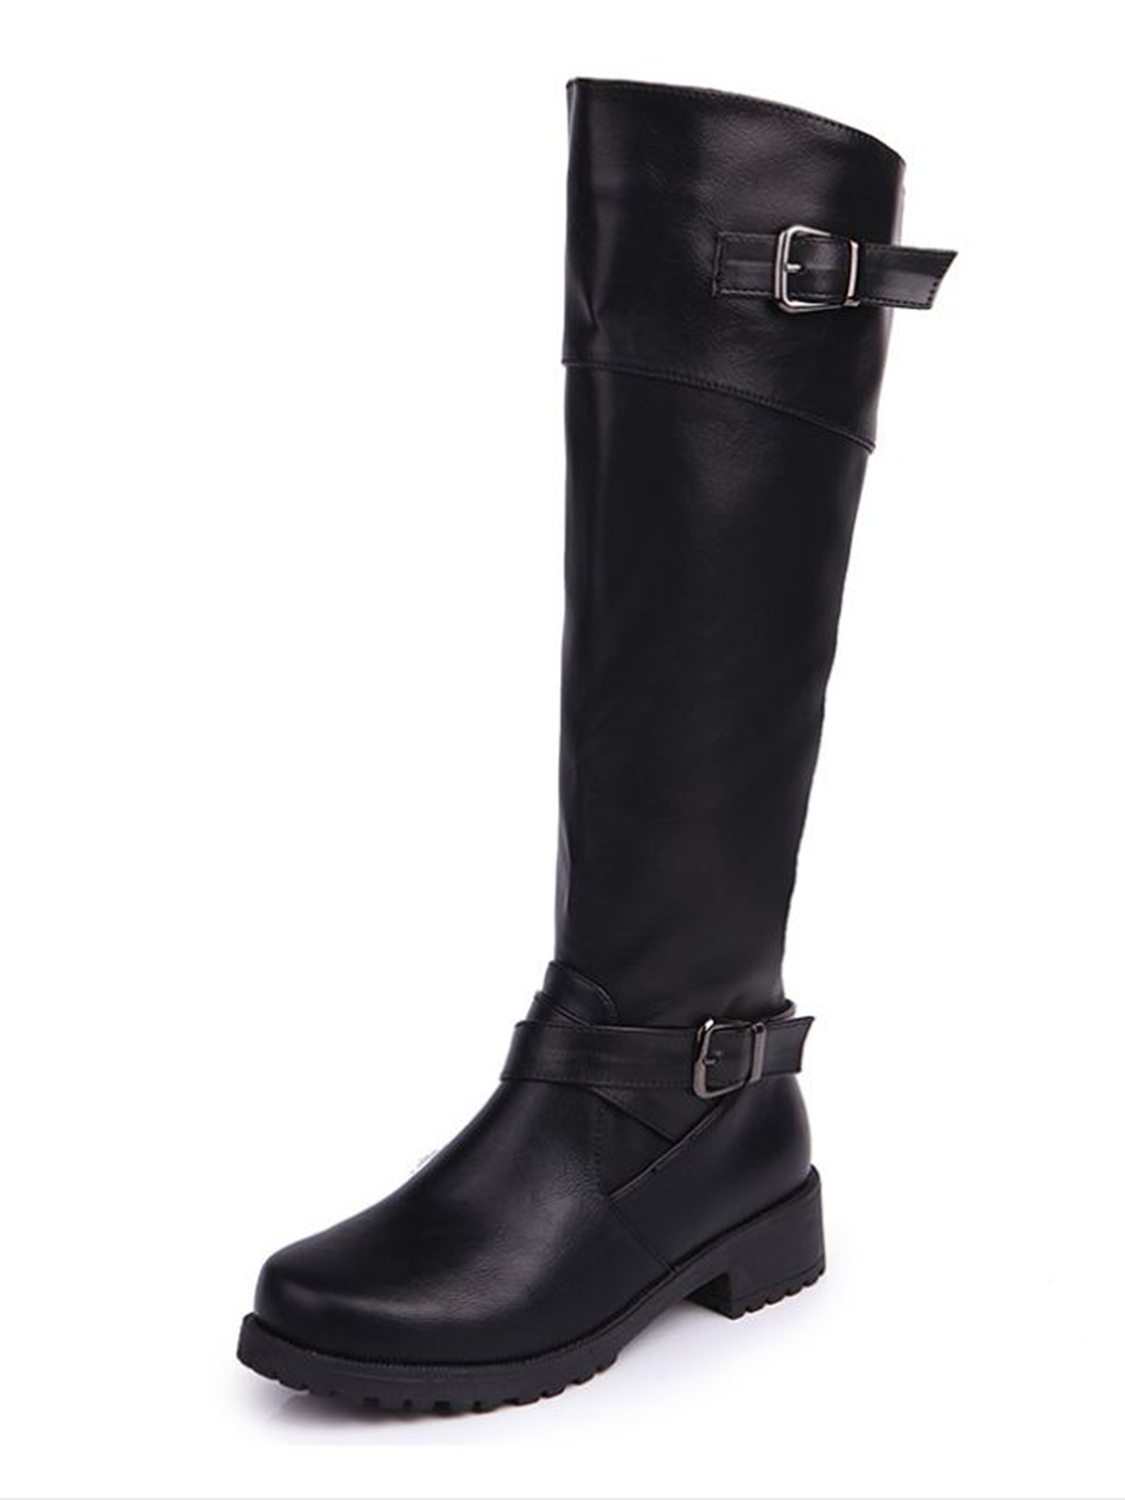 Black Leather Buckle Strap Knee High Boots | Choies